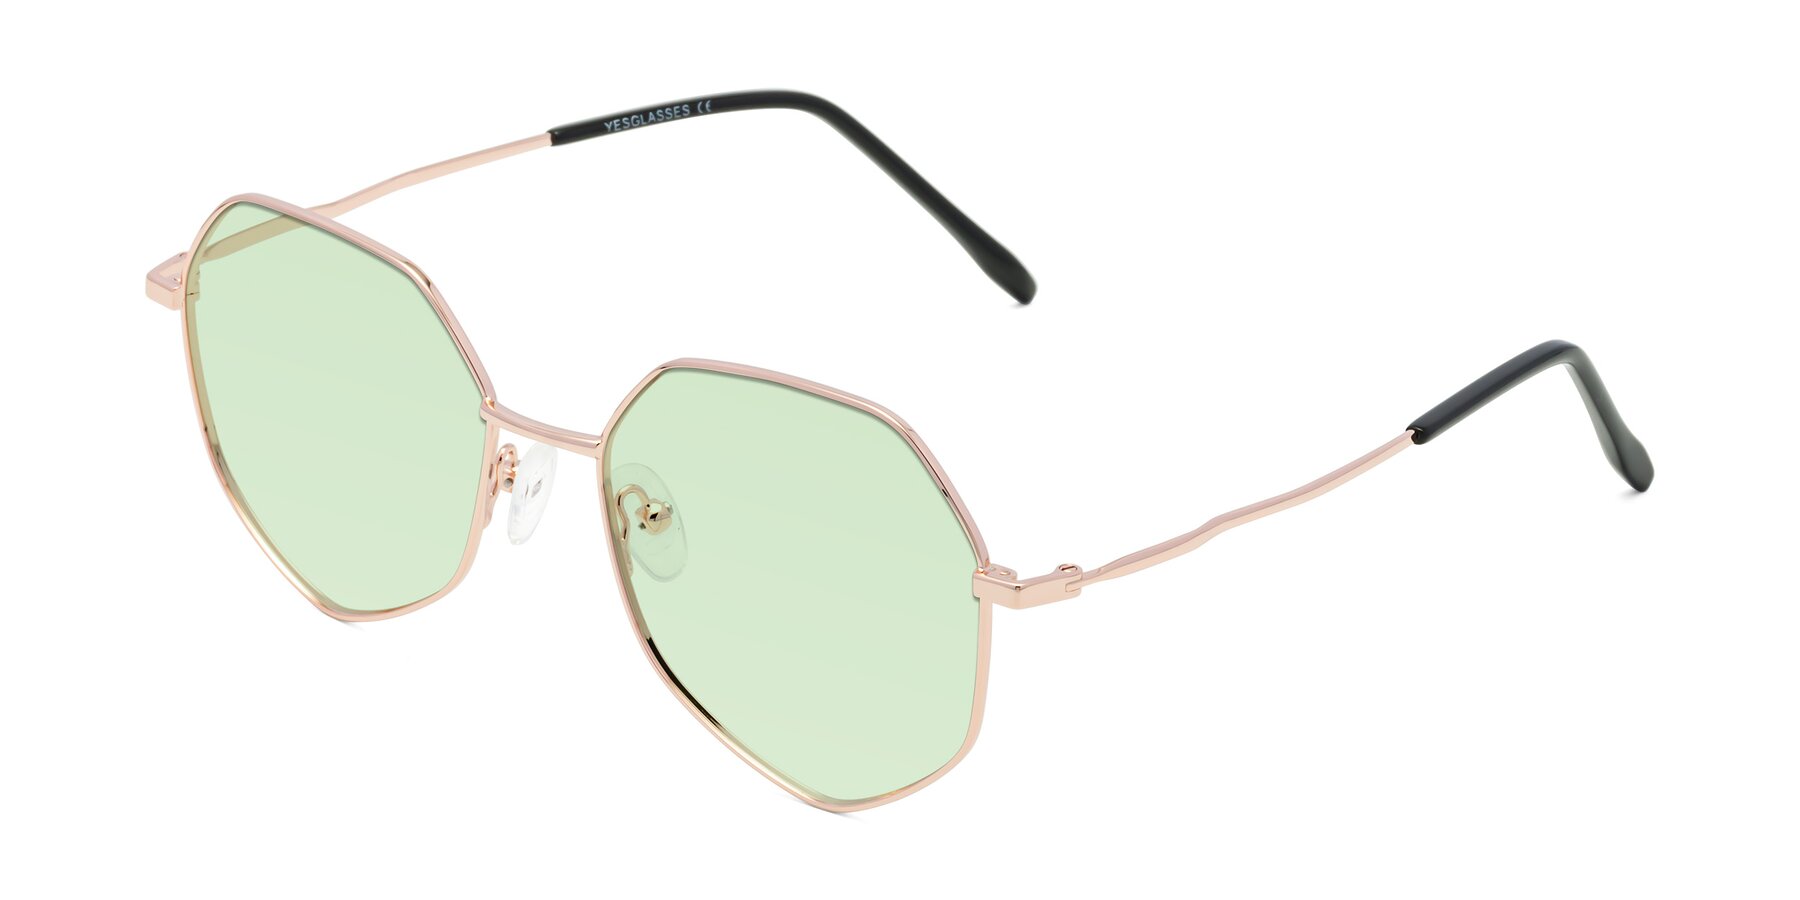 Angle of Sunshine in Rose Gold with Light Green Tinted Lenses